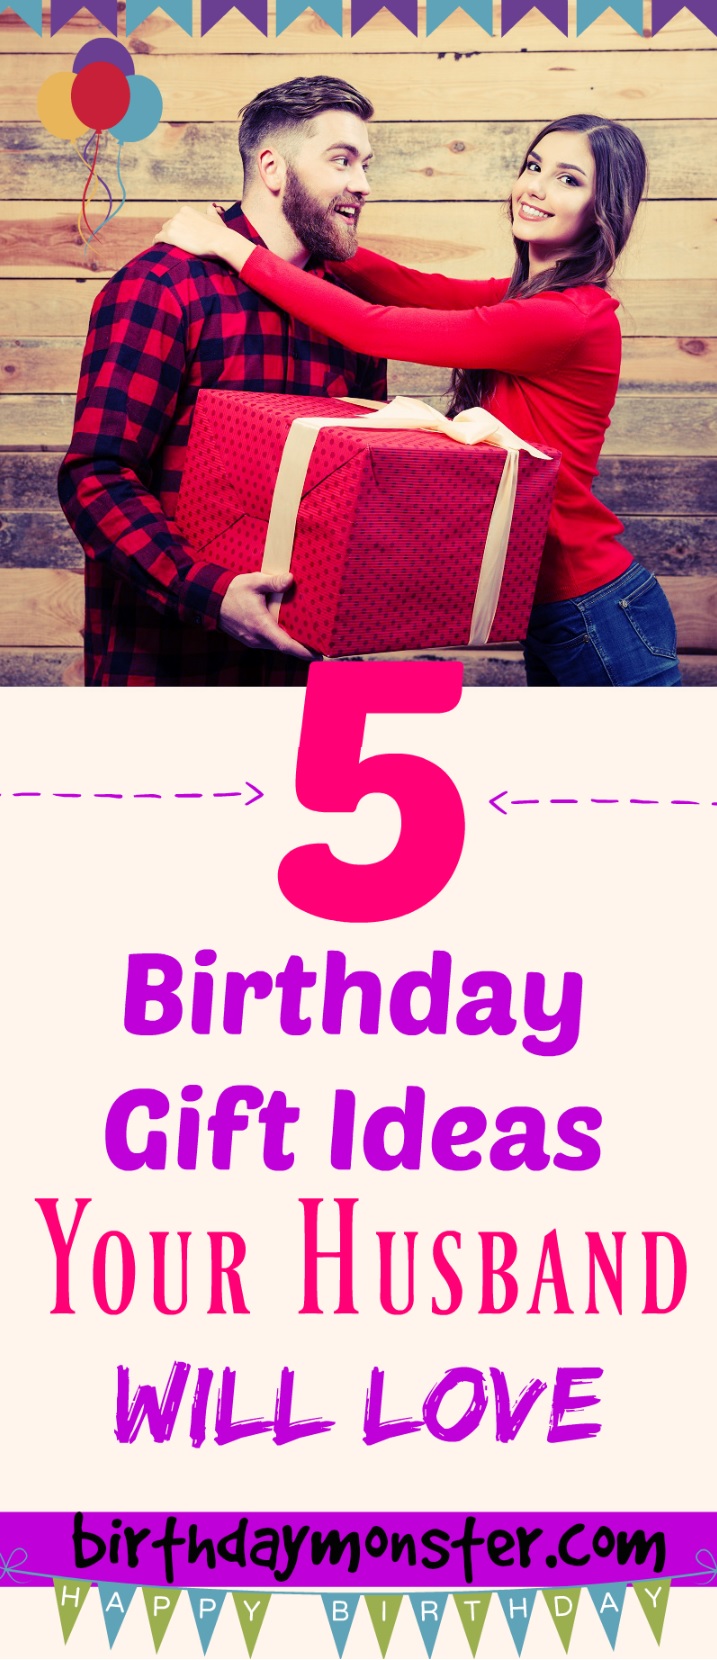 5 Birthday Gift Ideas Your Husband Will Love